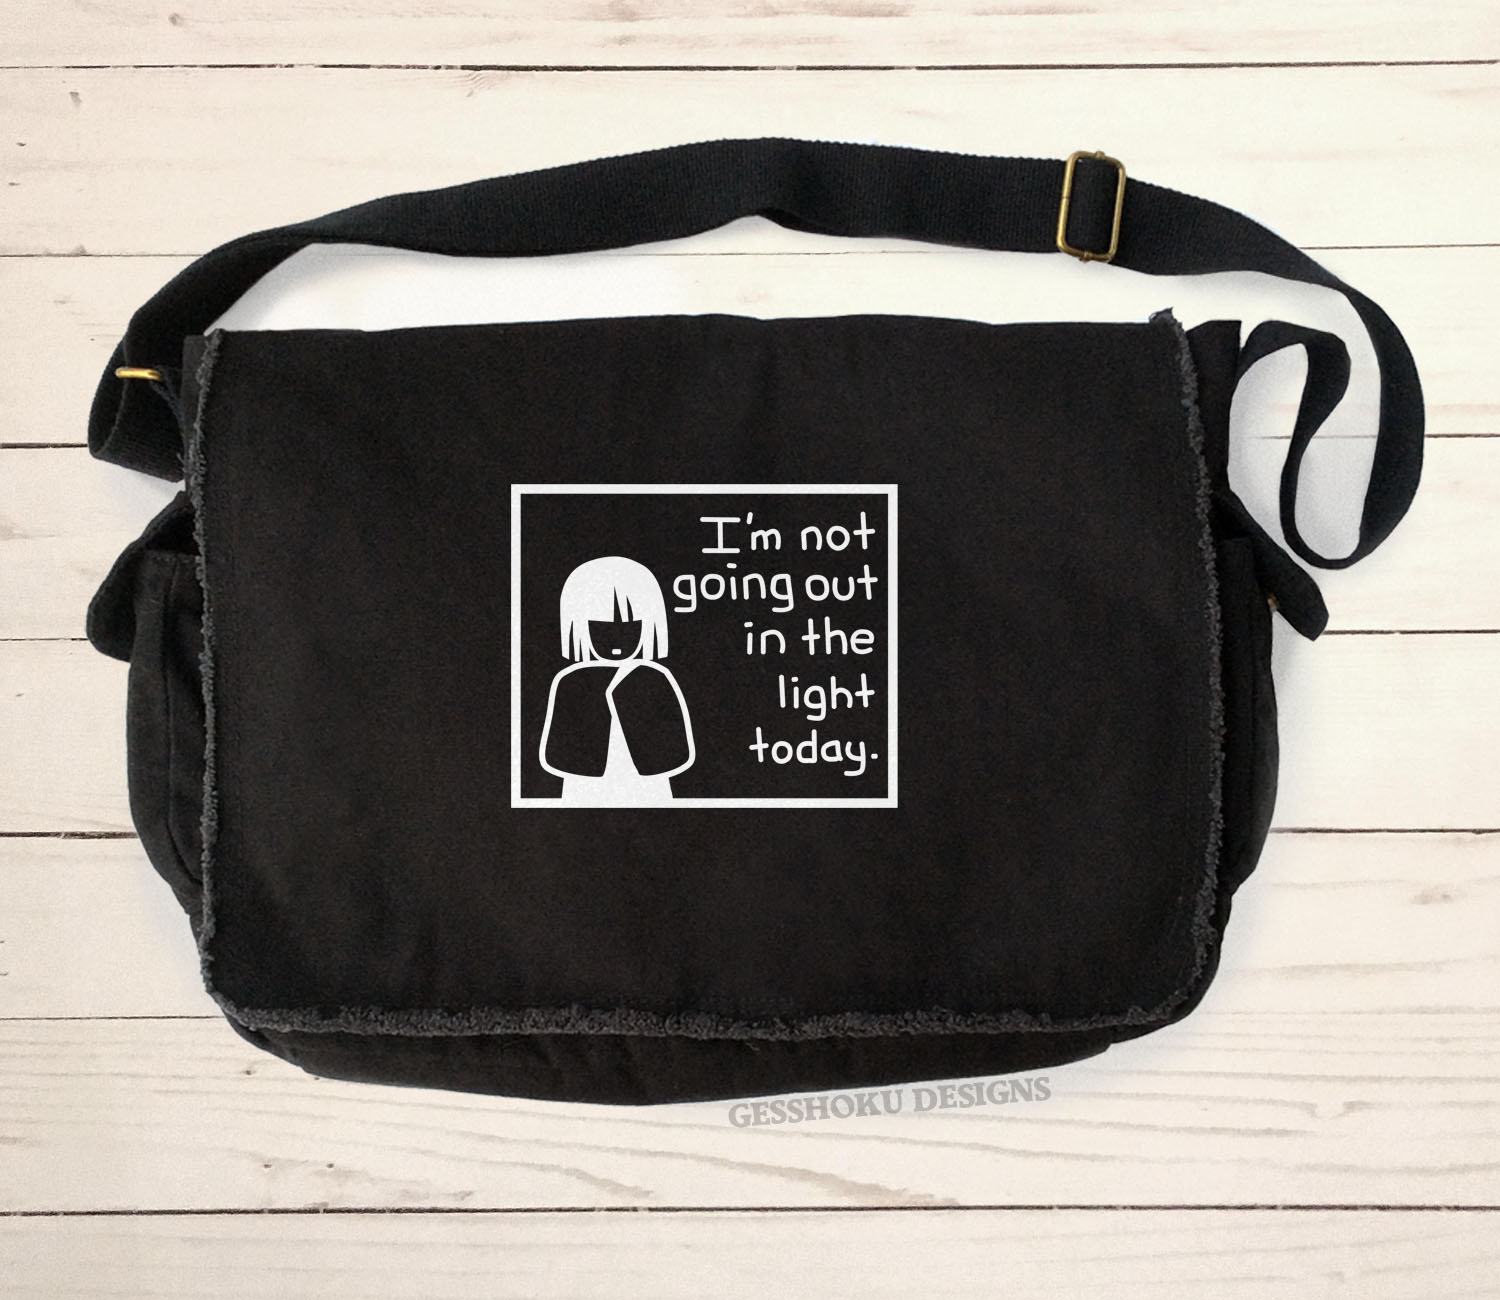 I'm Not Going Out in the Light Today Messenger Bag - Black